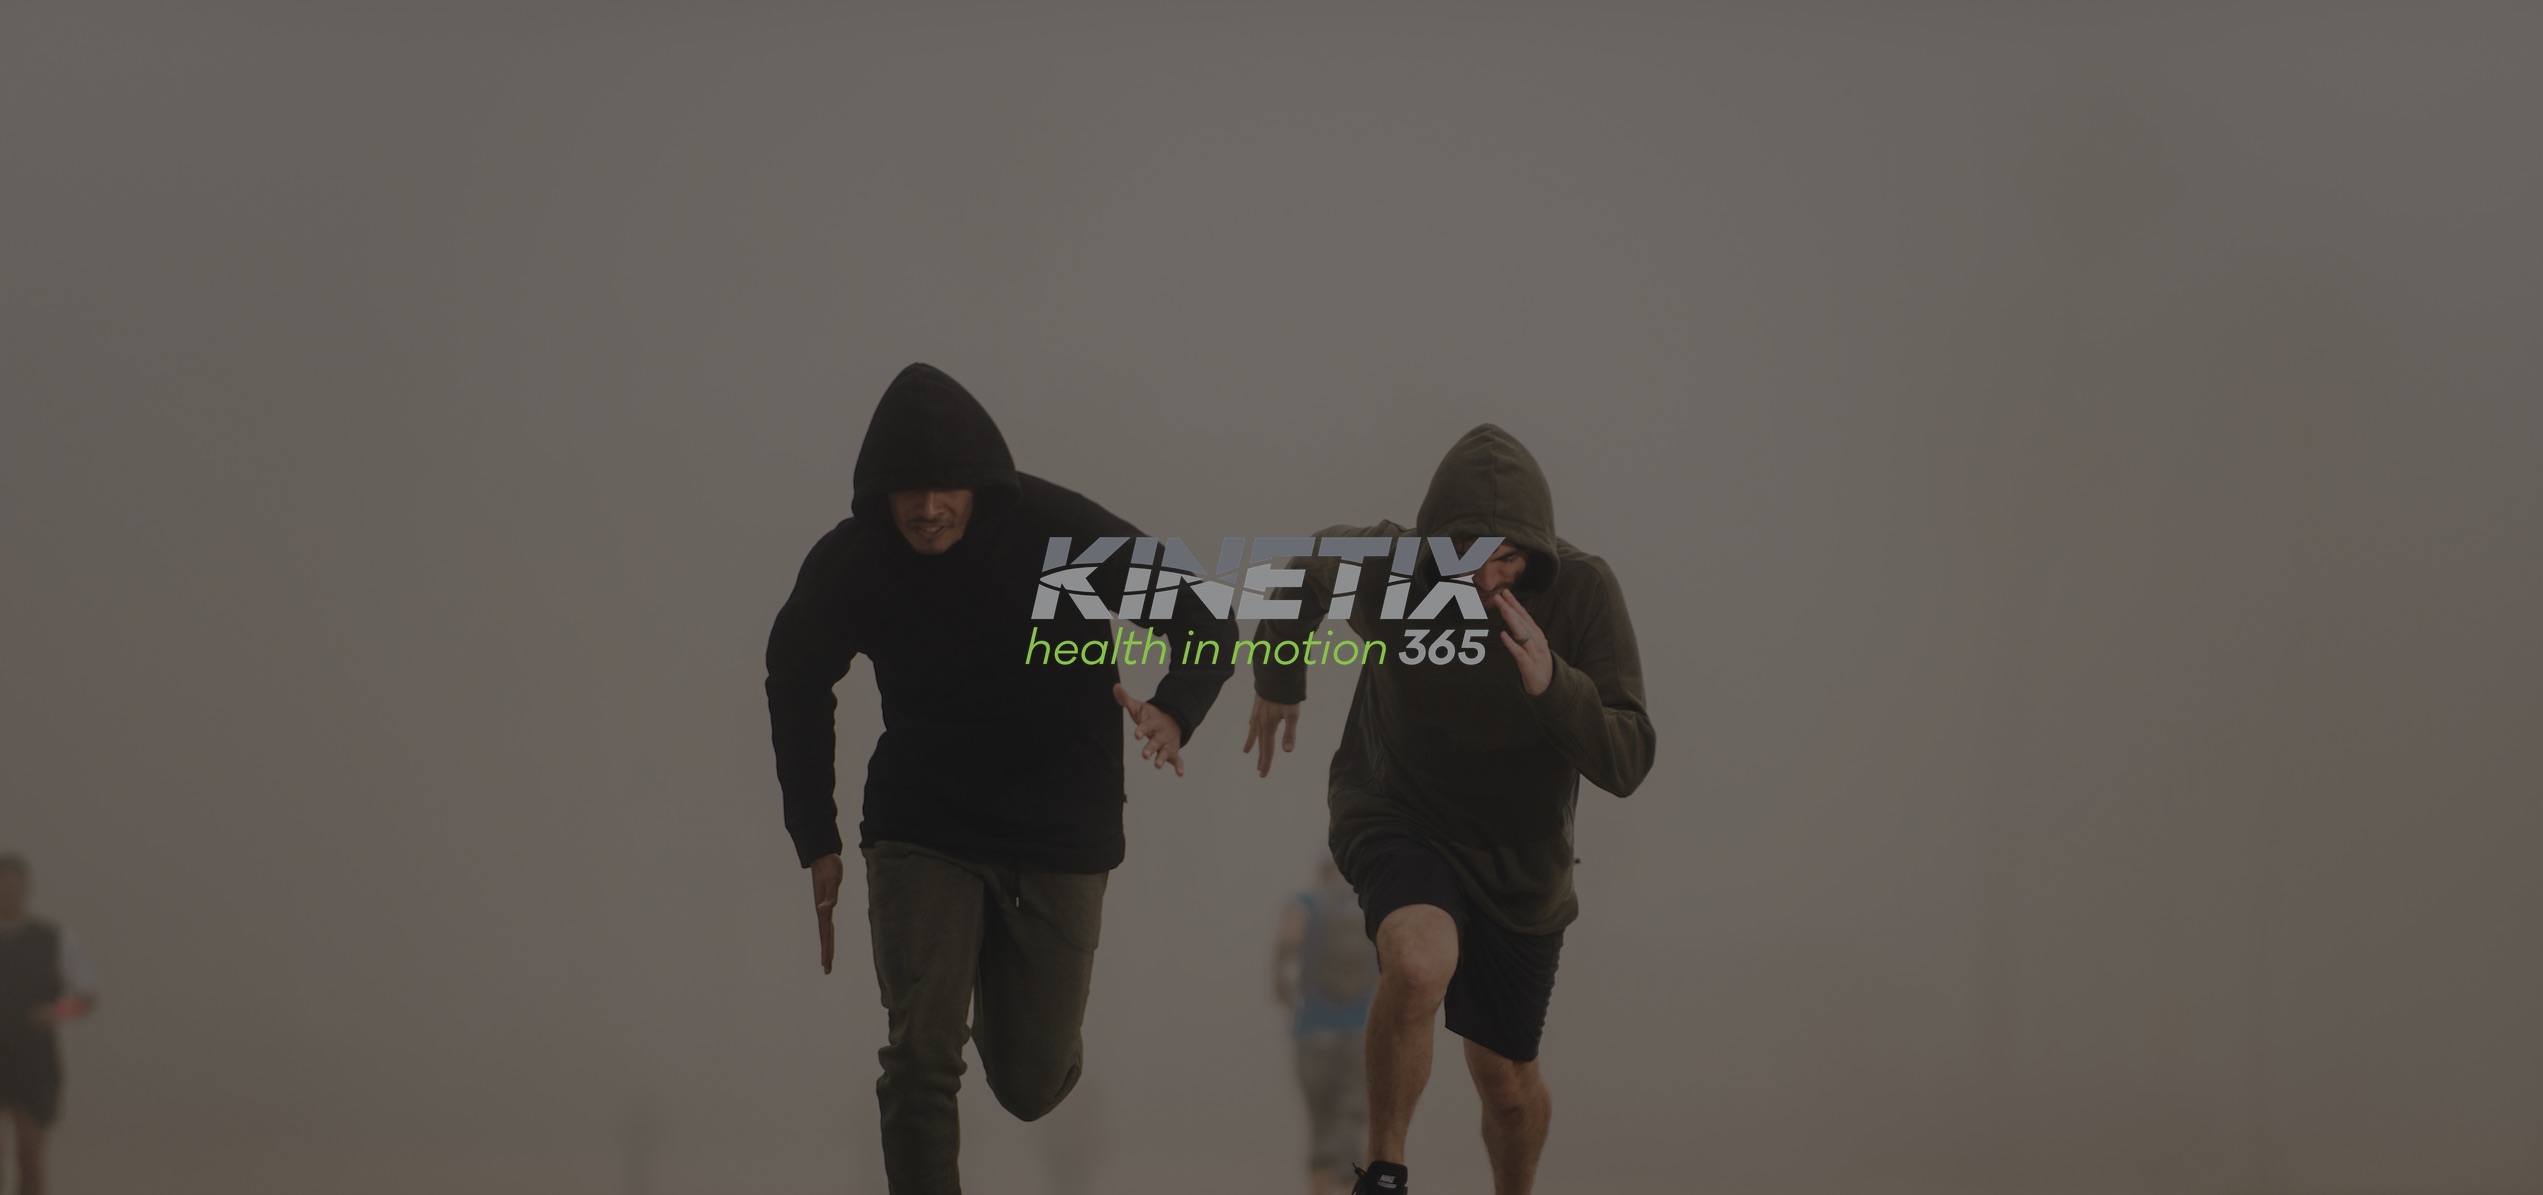 IU C&I Studios Page Kinetix Featured Image Kinetix Health in Motion 365 logo with two men running in the background